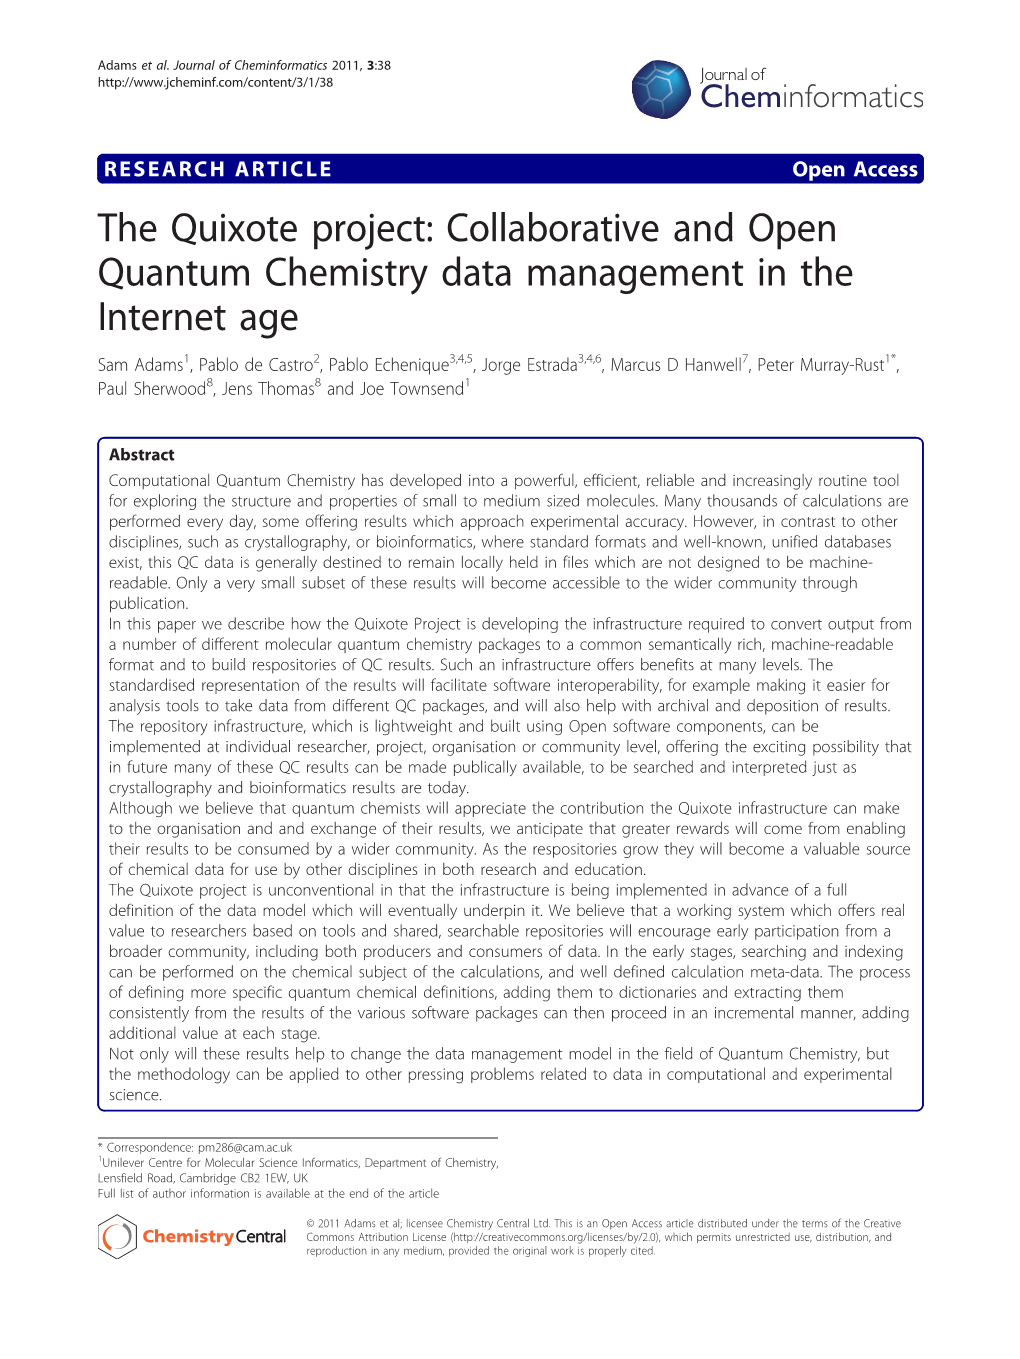 The Quixote Project: Collaborative and Open Quantum Chemistry Data Management in the Internet